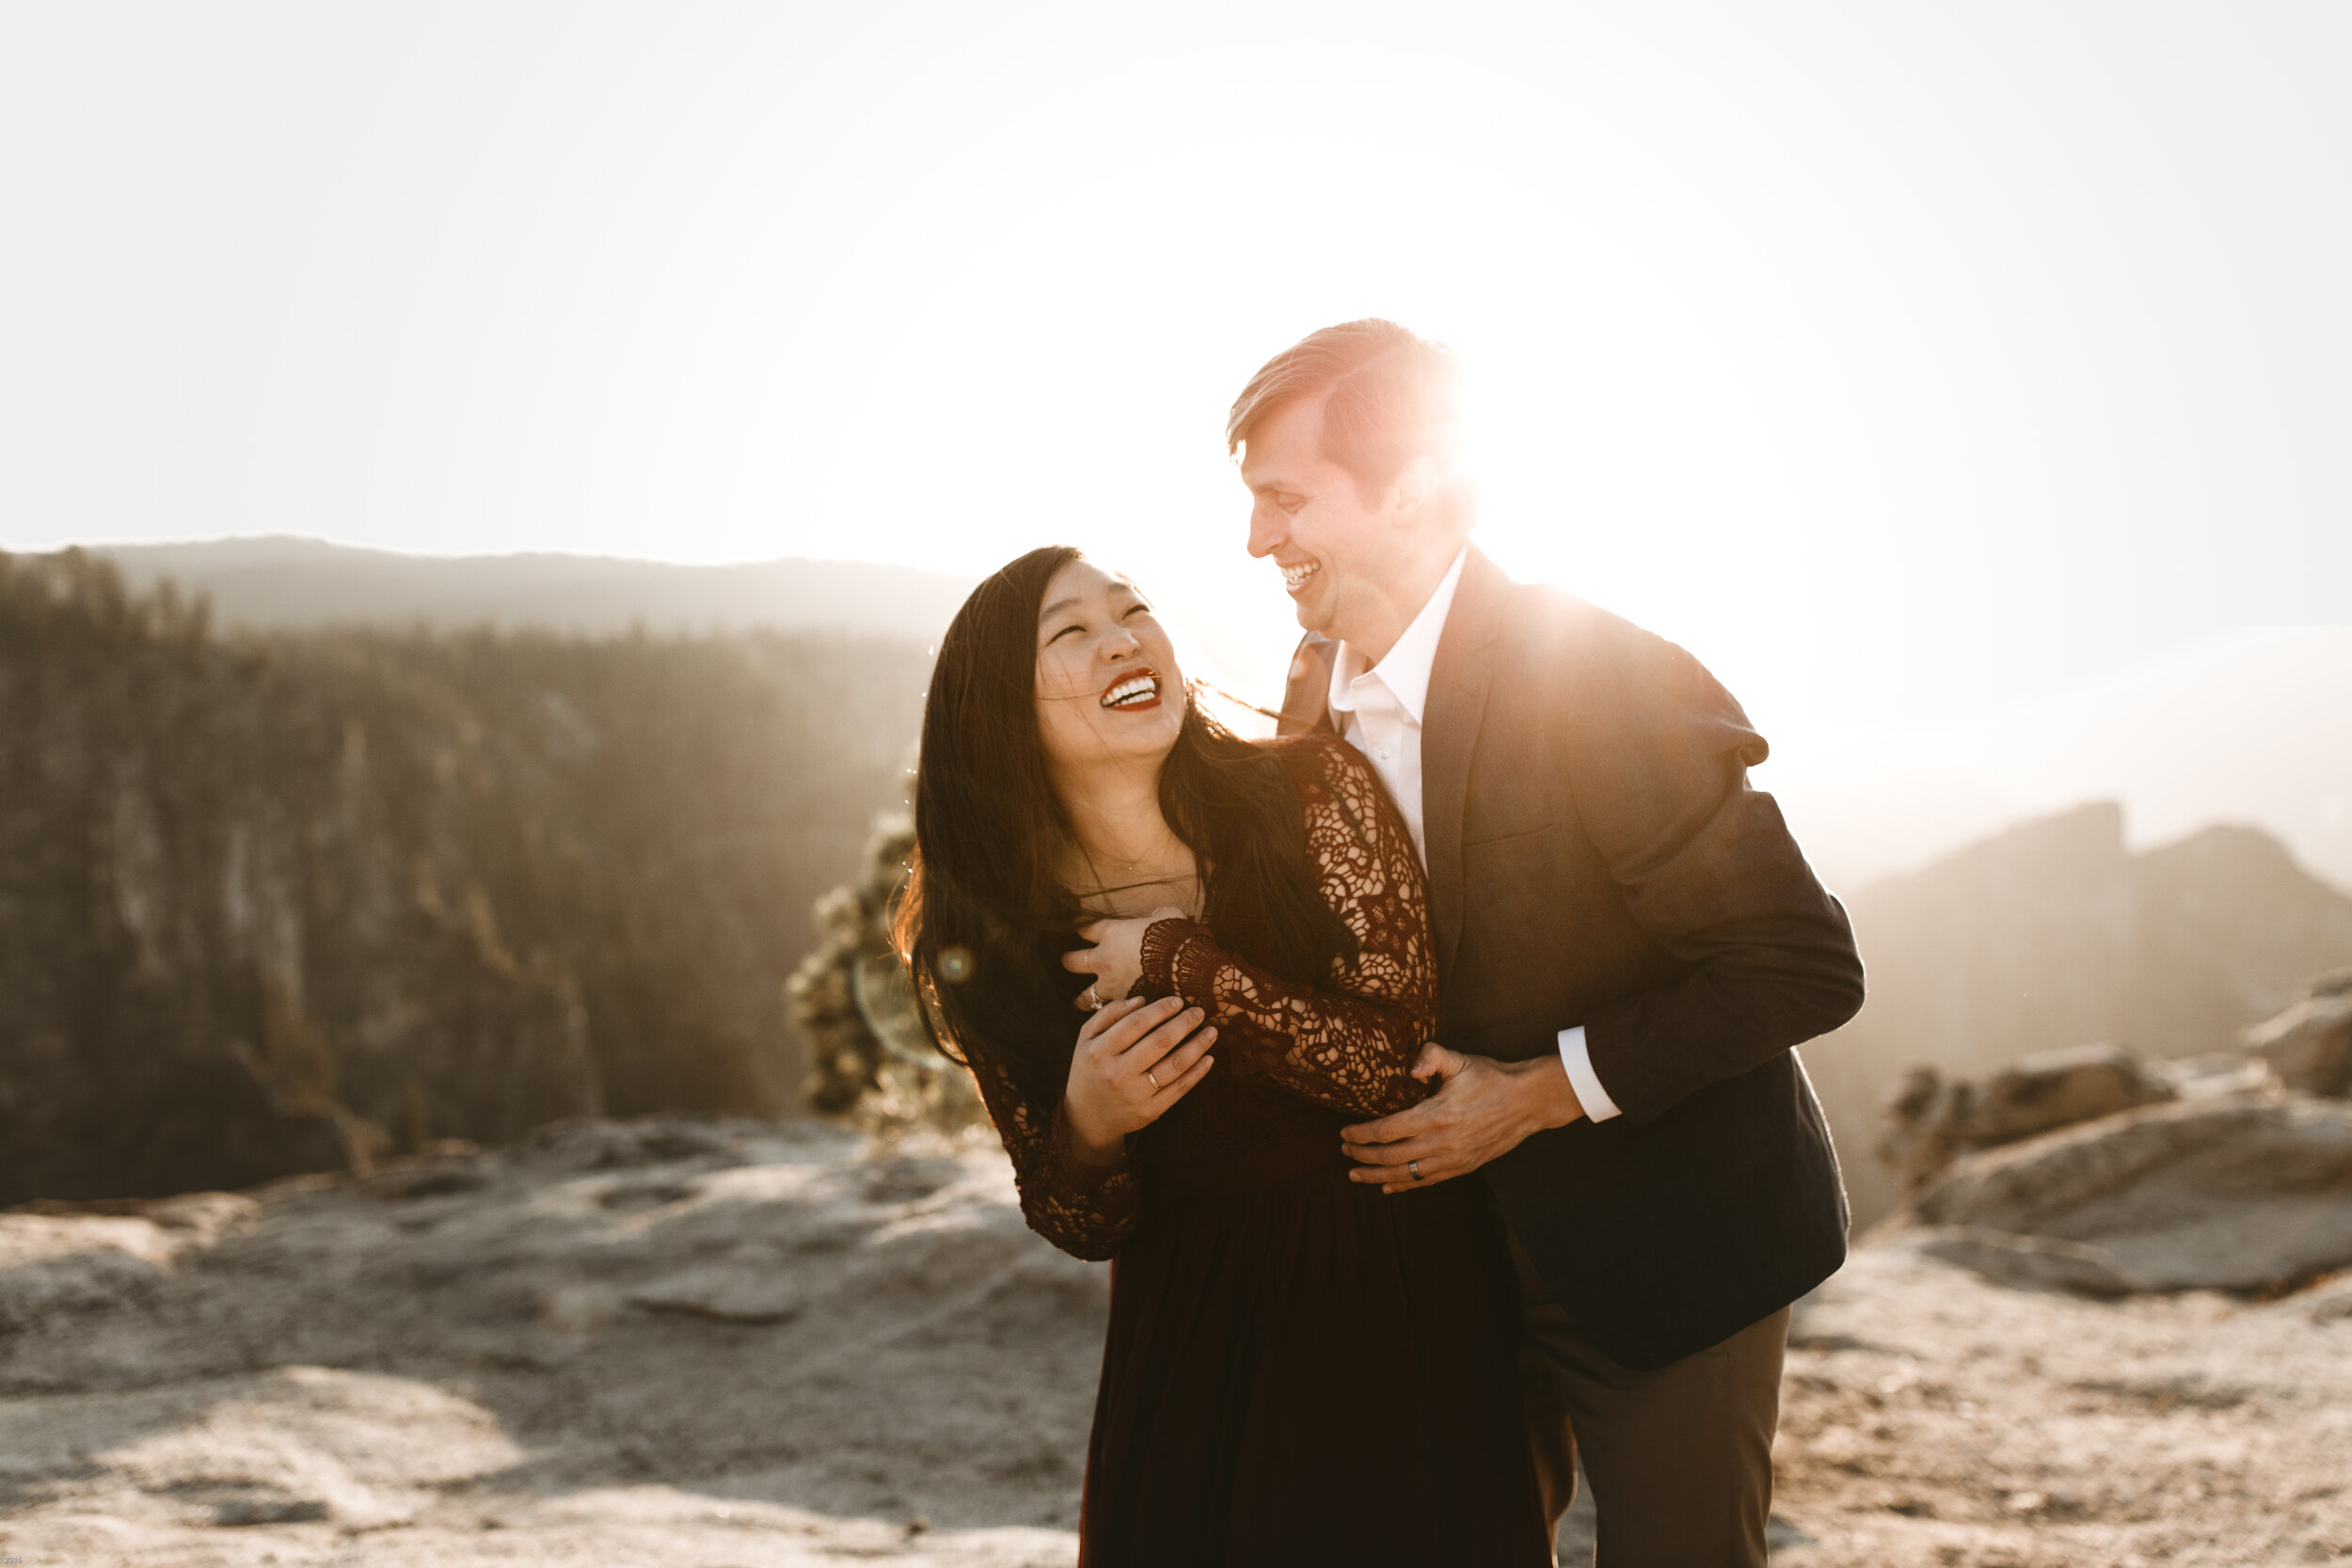 yosemite-national-park-couples-session-at-taft-point-and-yosemite-valley-yosemite-elopement-photographer-nicole-daacke-photography-139.jpg